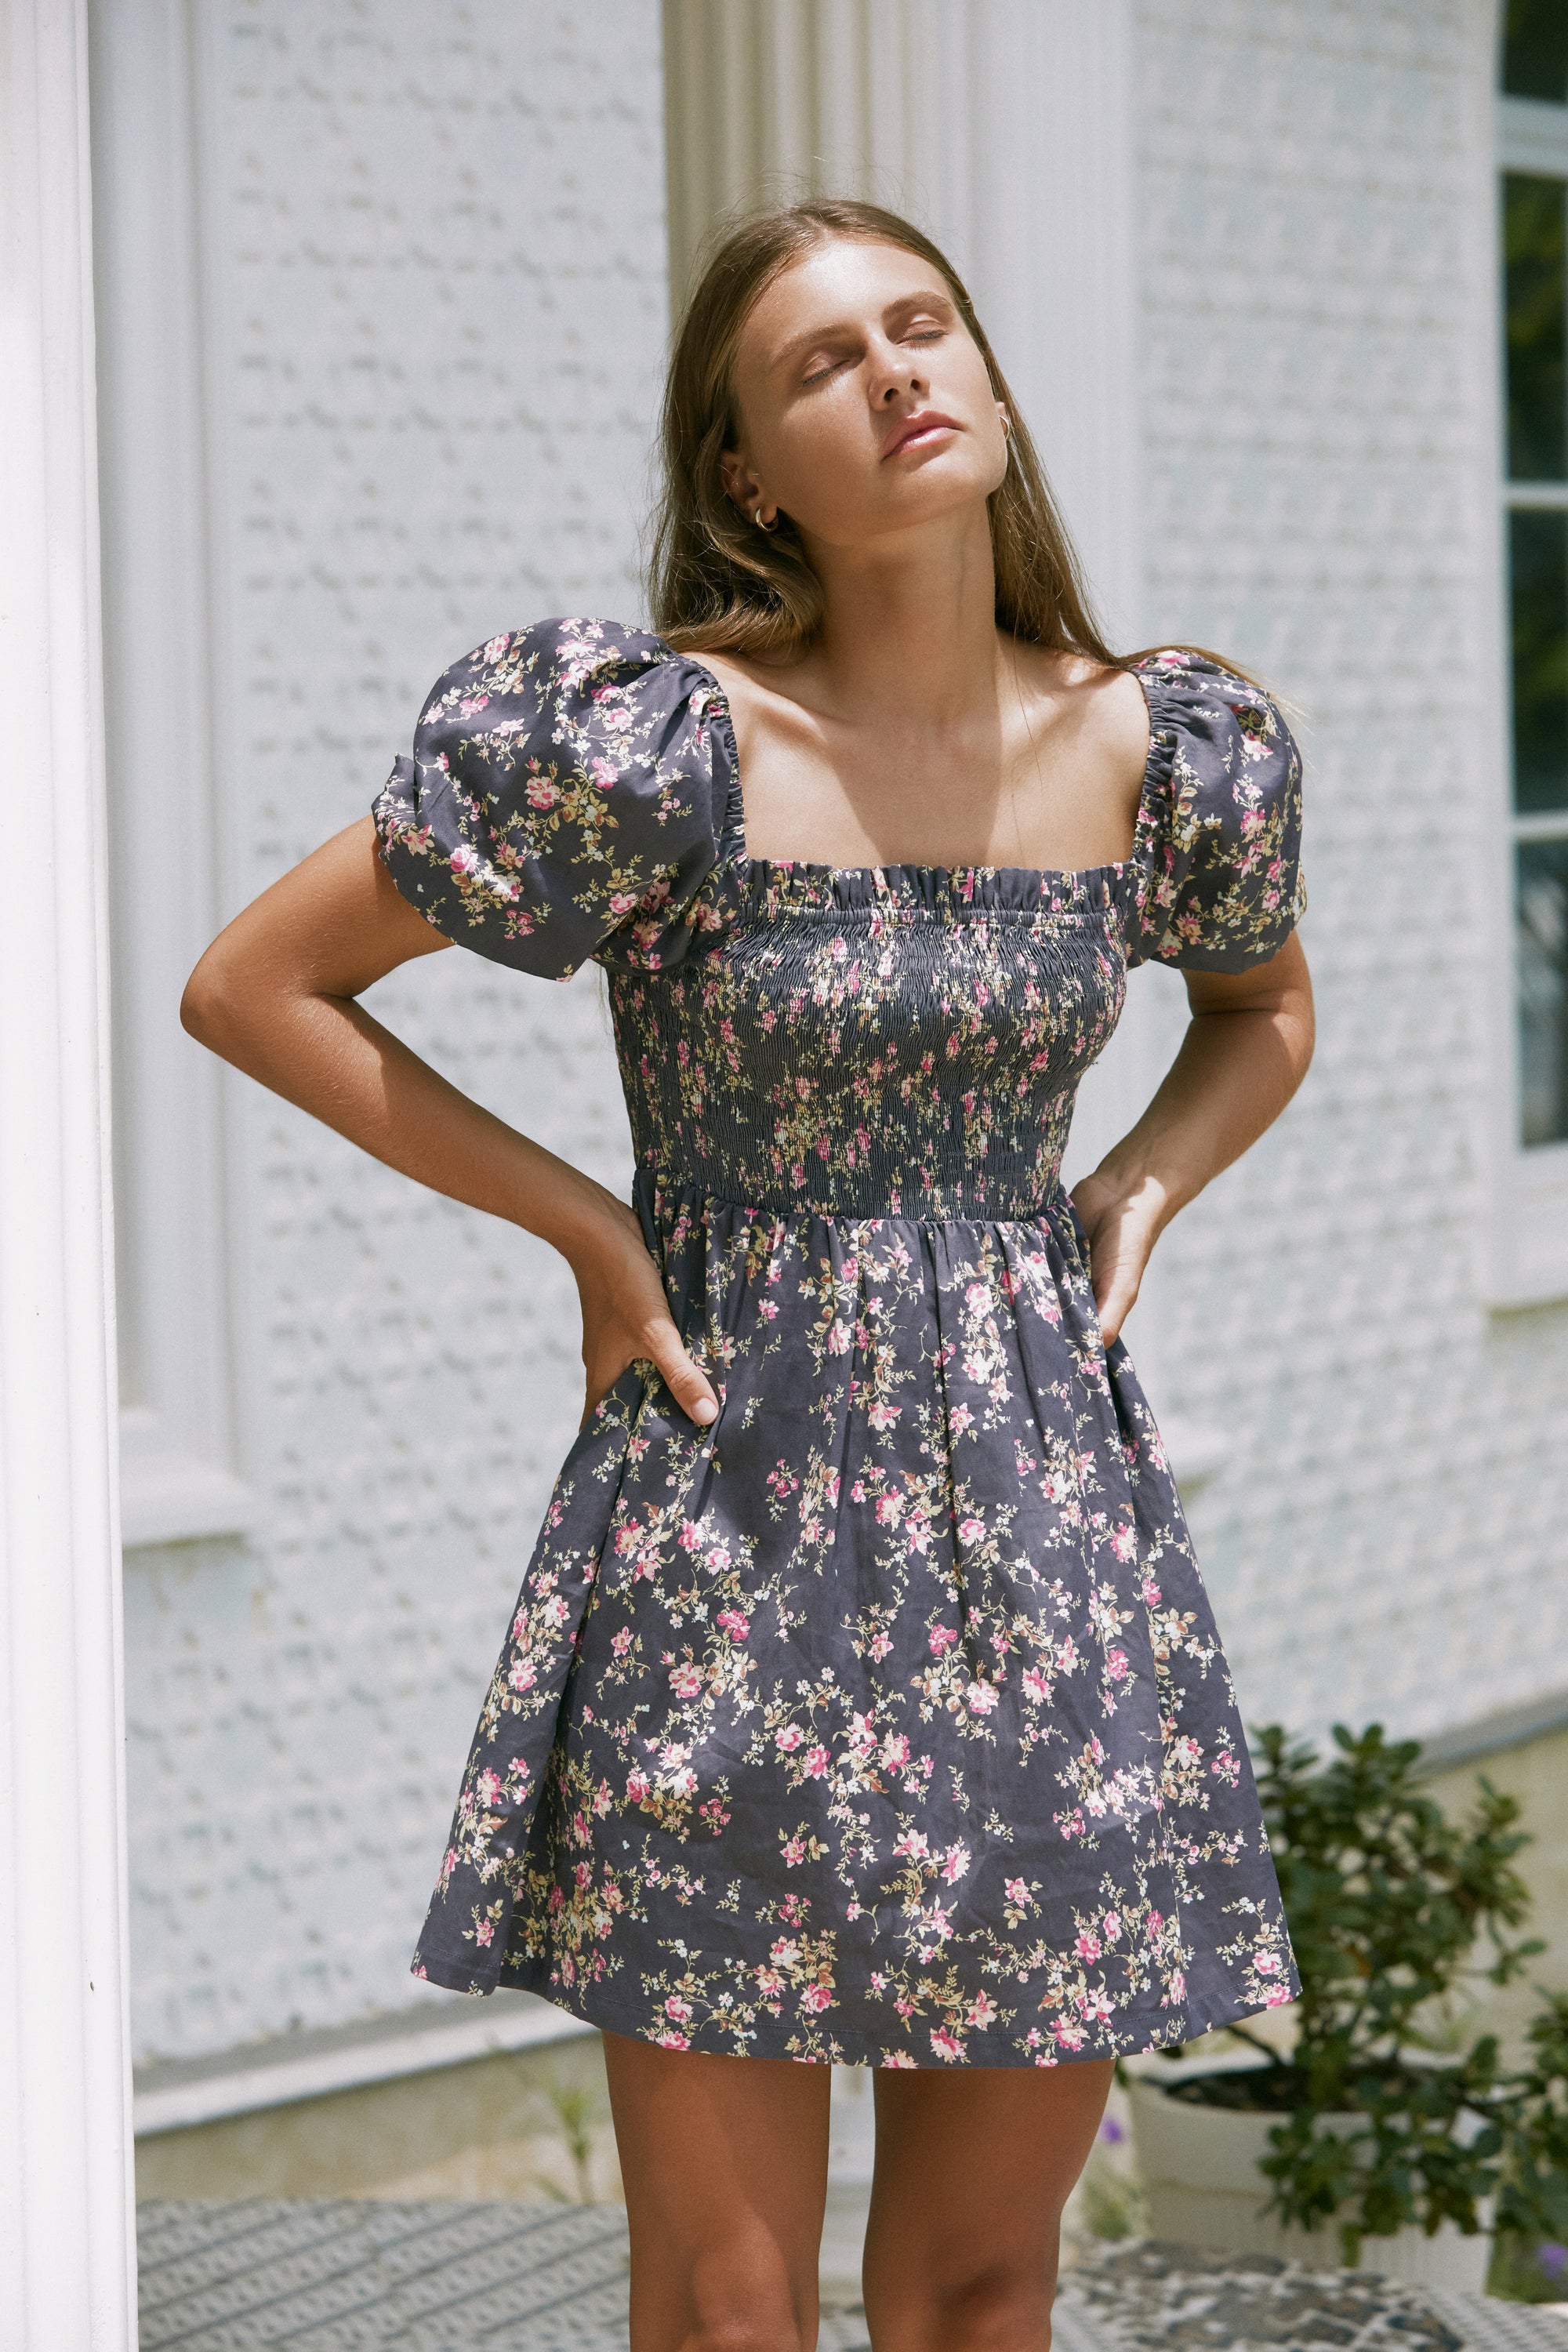 Woman wearing floral print summer dress with her both hands on her waist